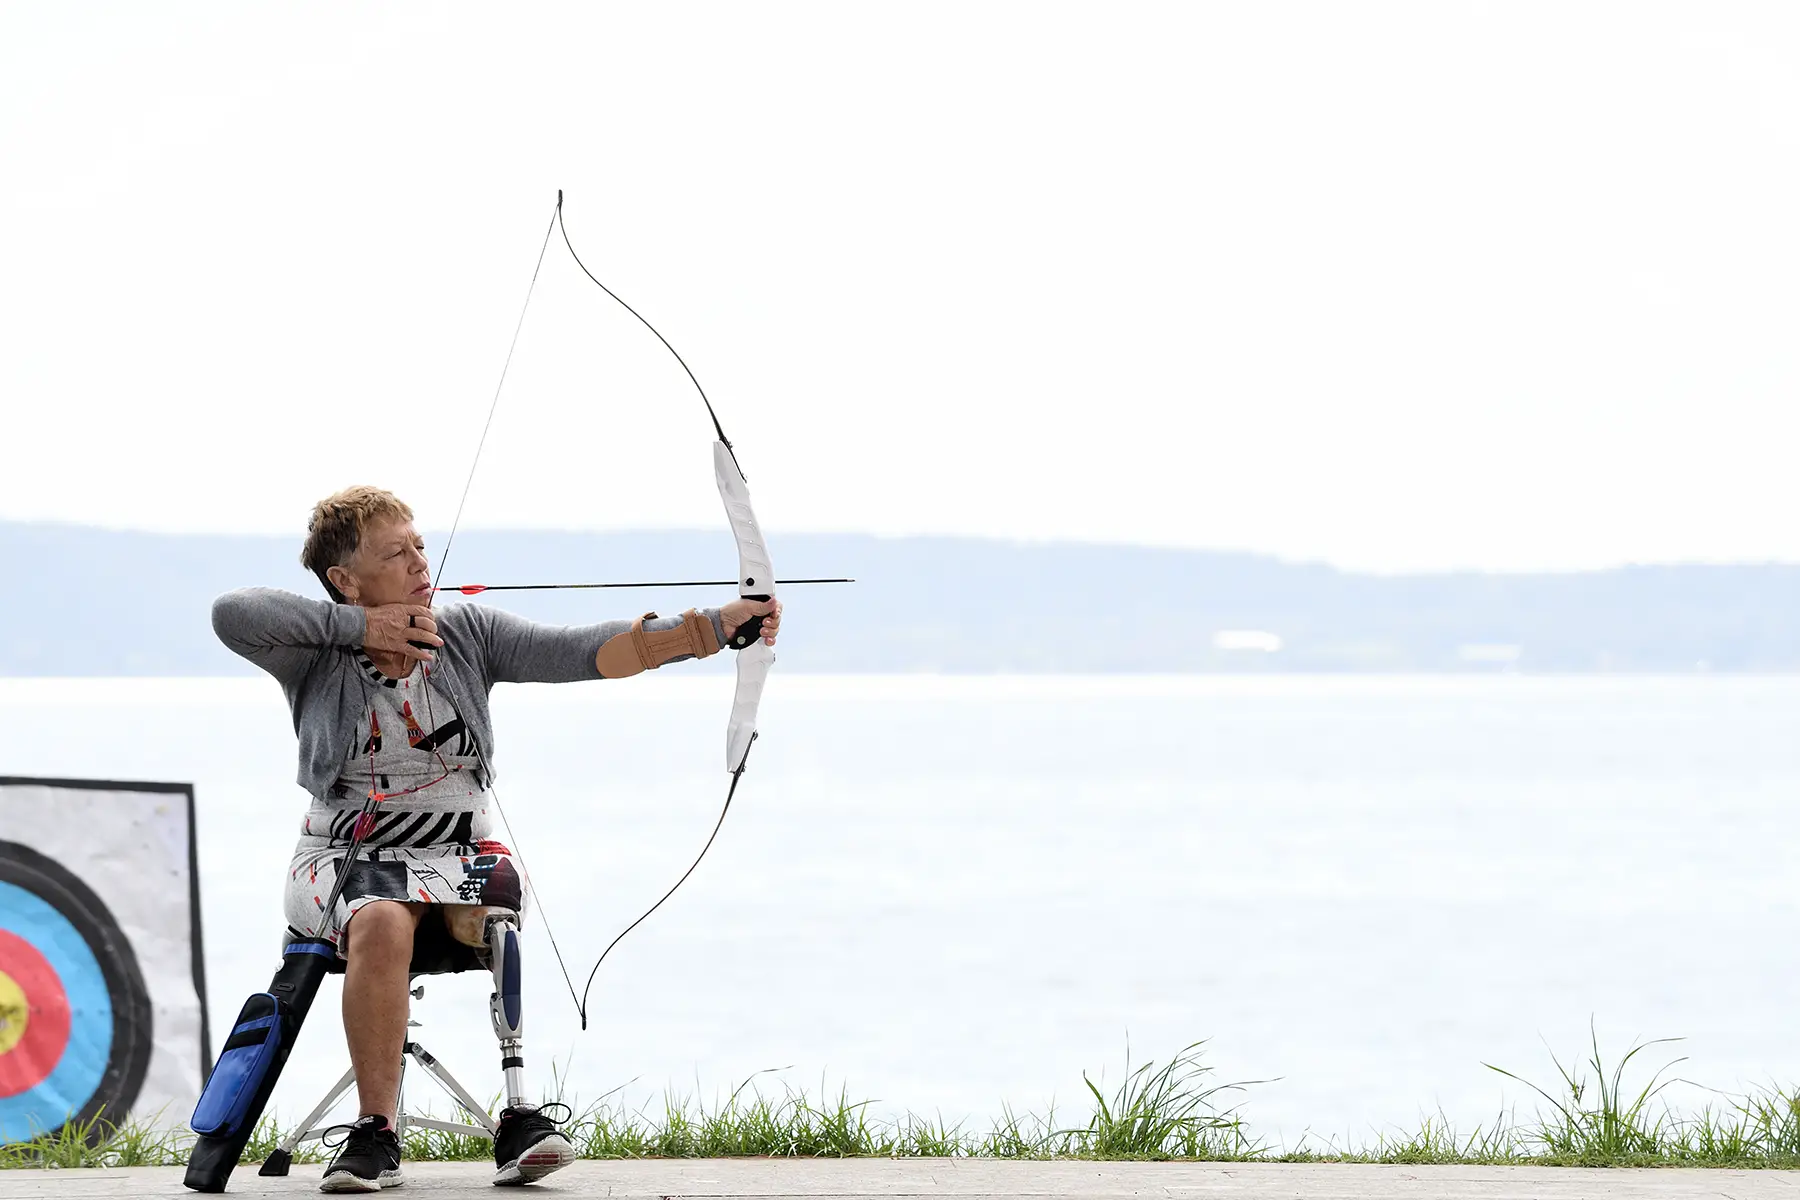 A person with a prosthetic leg doing archery